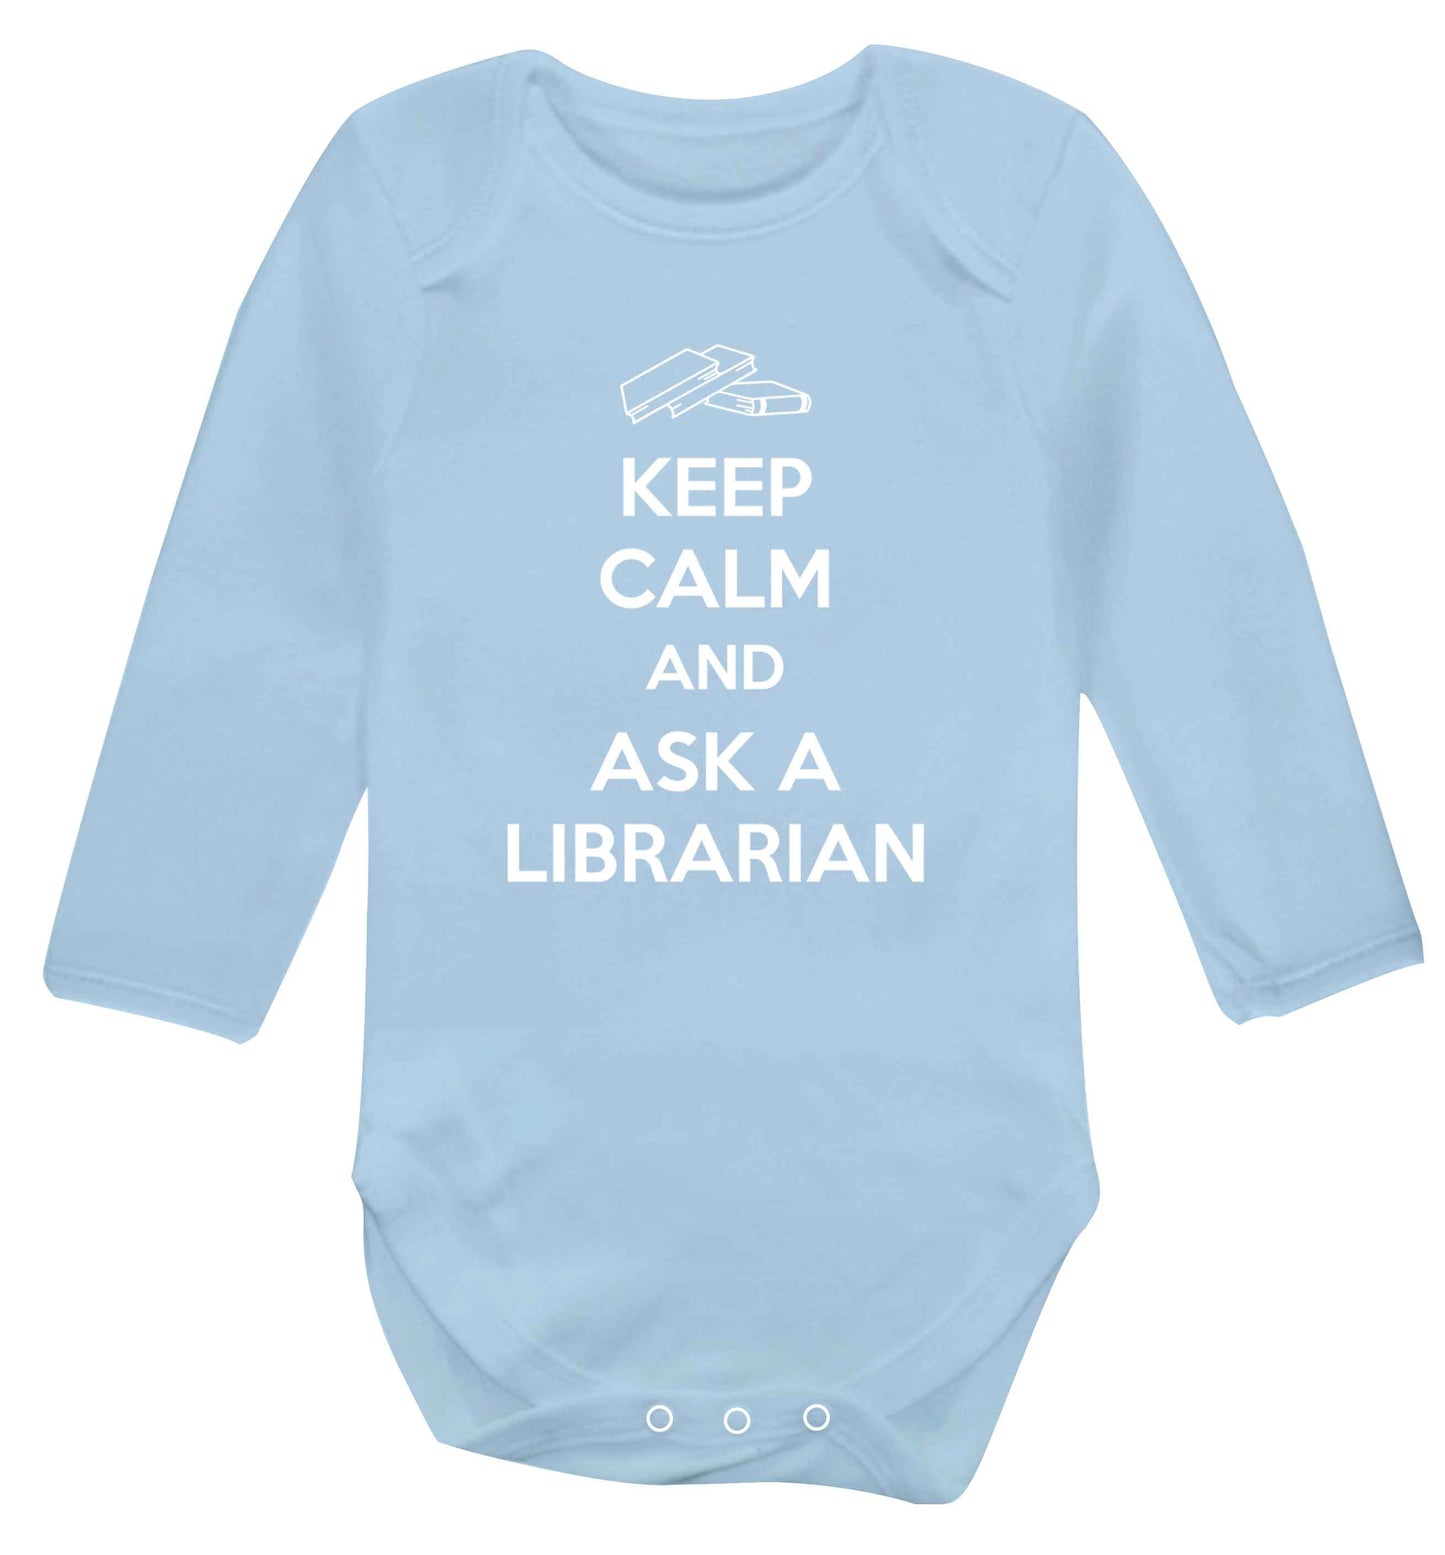 Keep calm and ask a librarian Baby Vest long sleeved pale blue 6-12 months